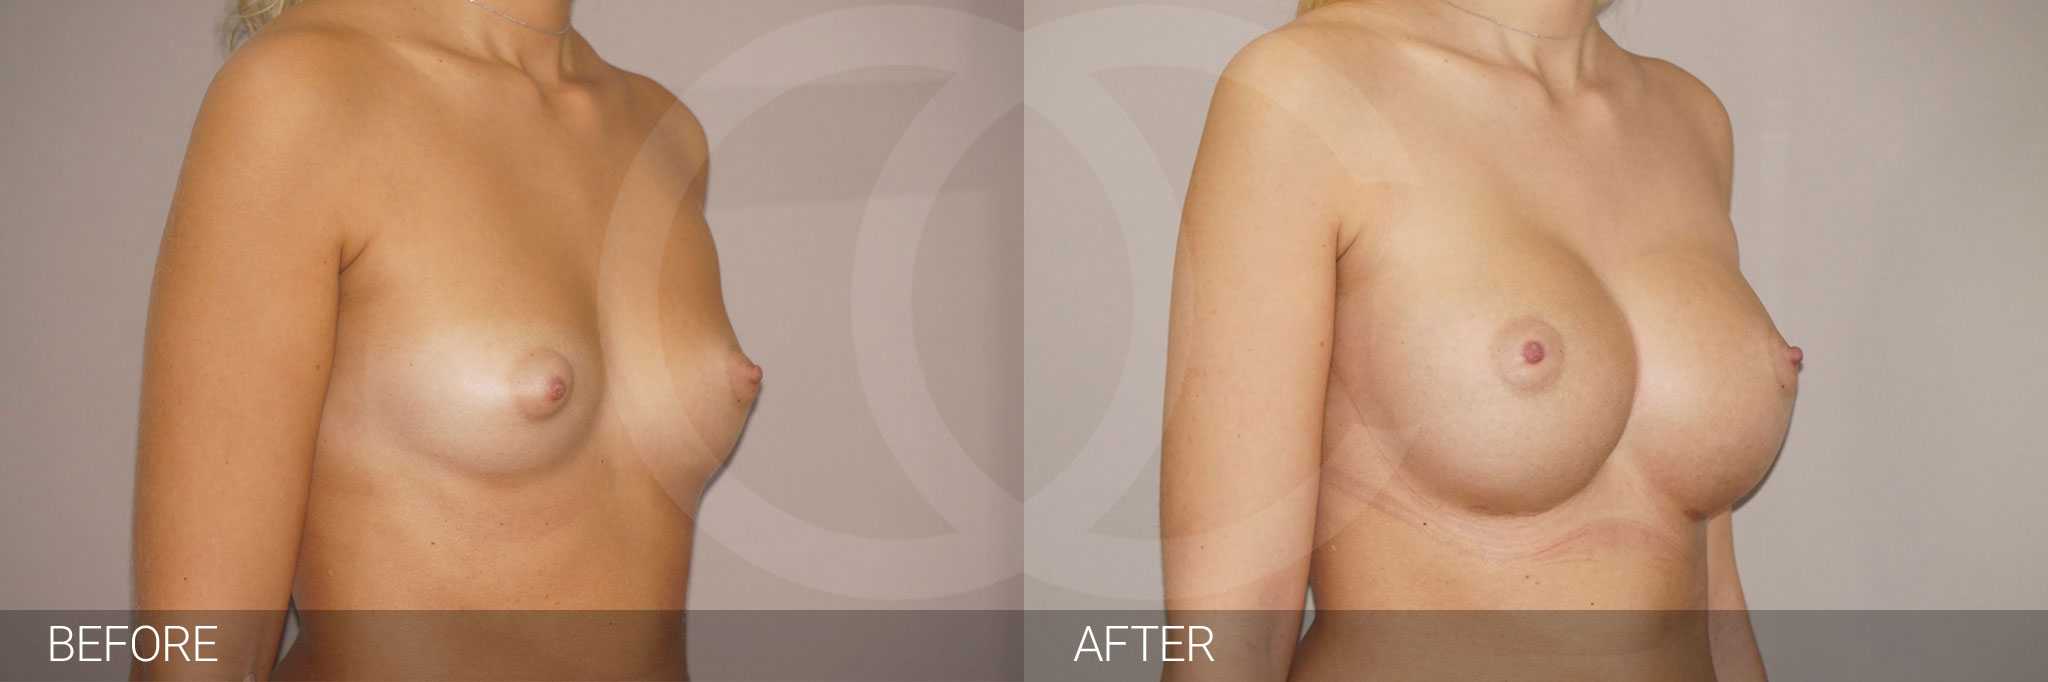 Breast Augmentation Nagor Anatomical 485cc ante/post-op II